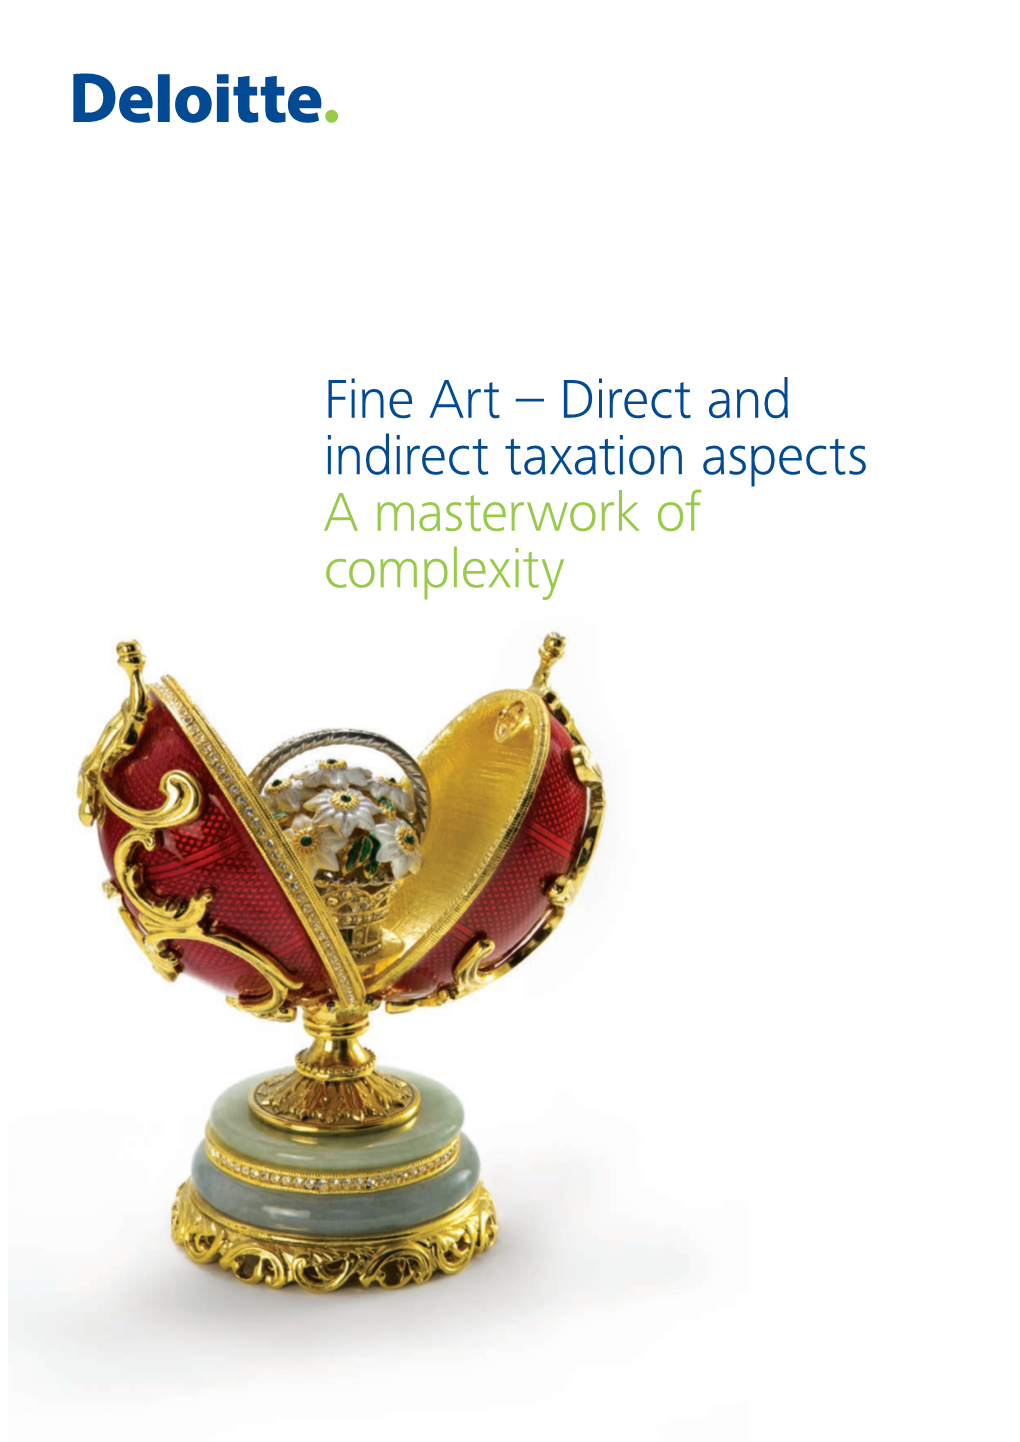 Fine Art – Direct and Indirect Taxation Aspects a Masterwork of Complexity